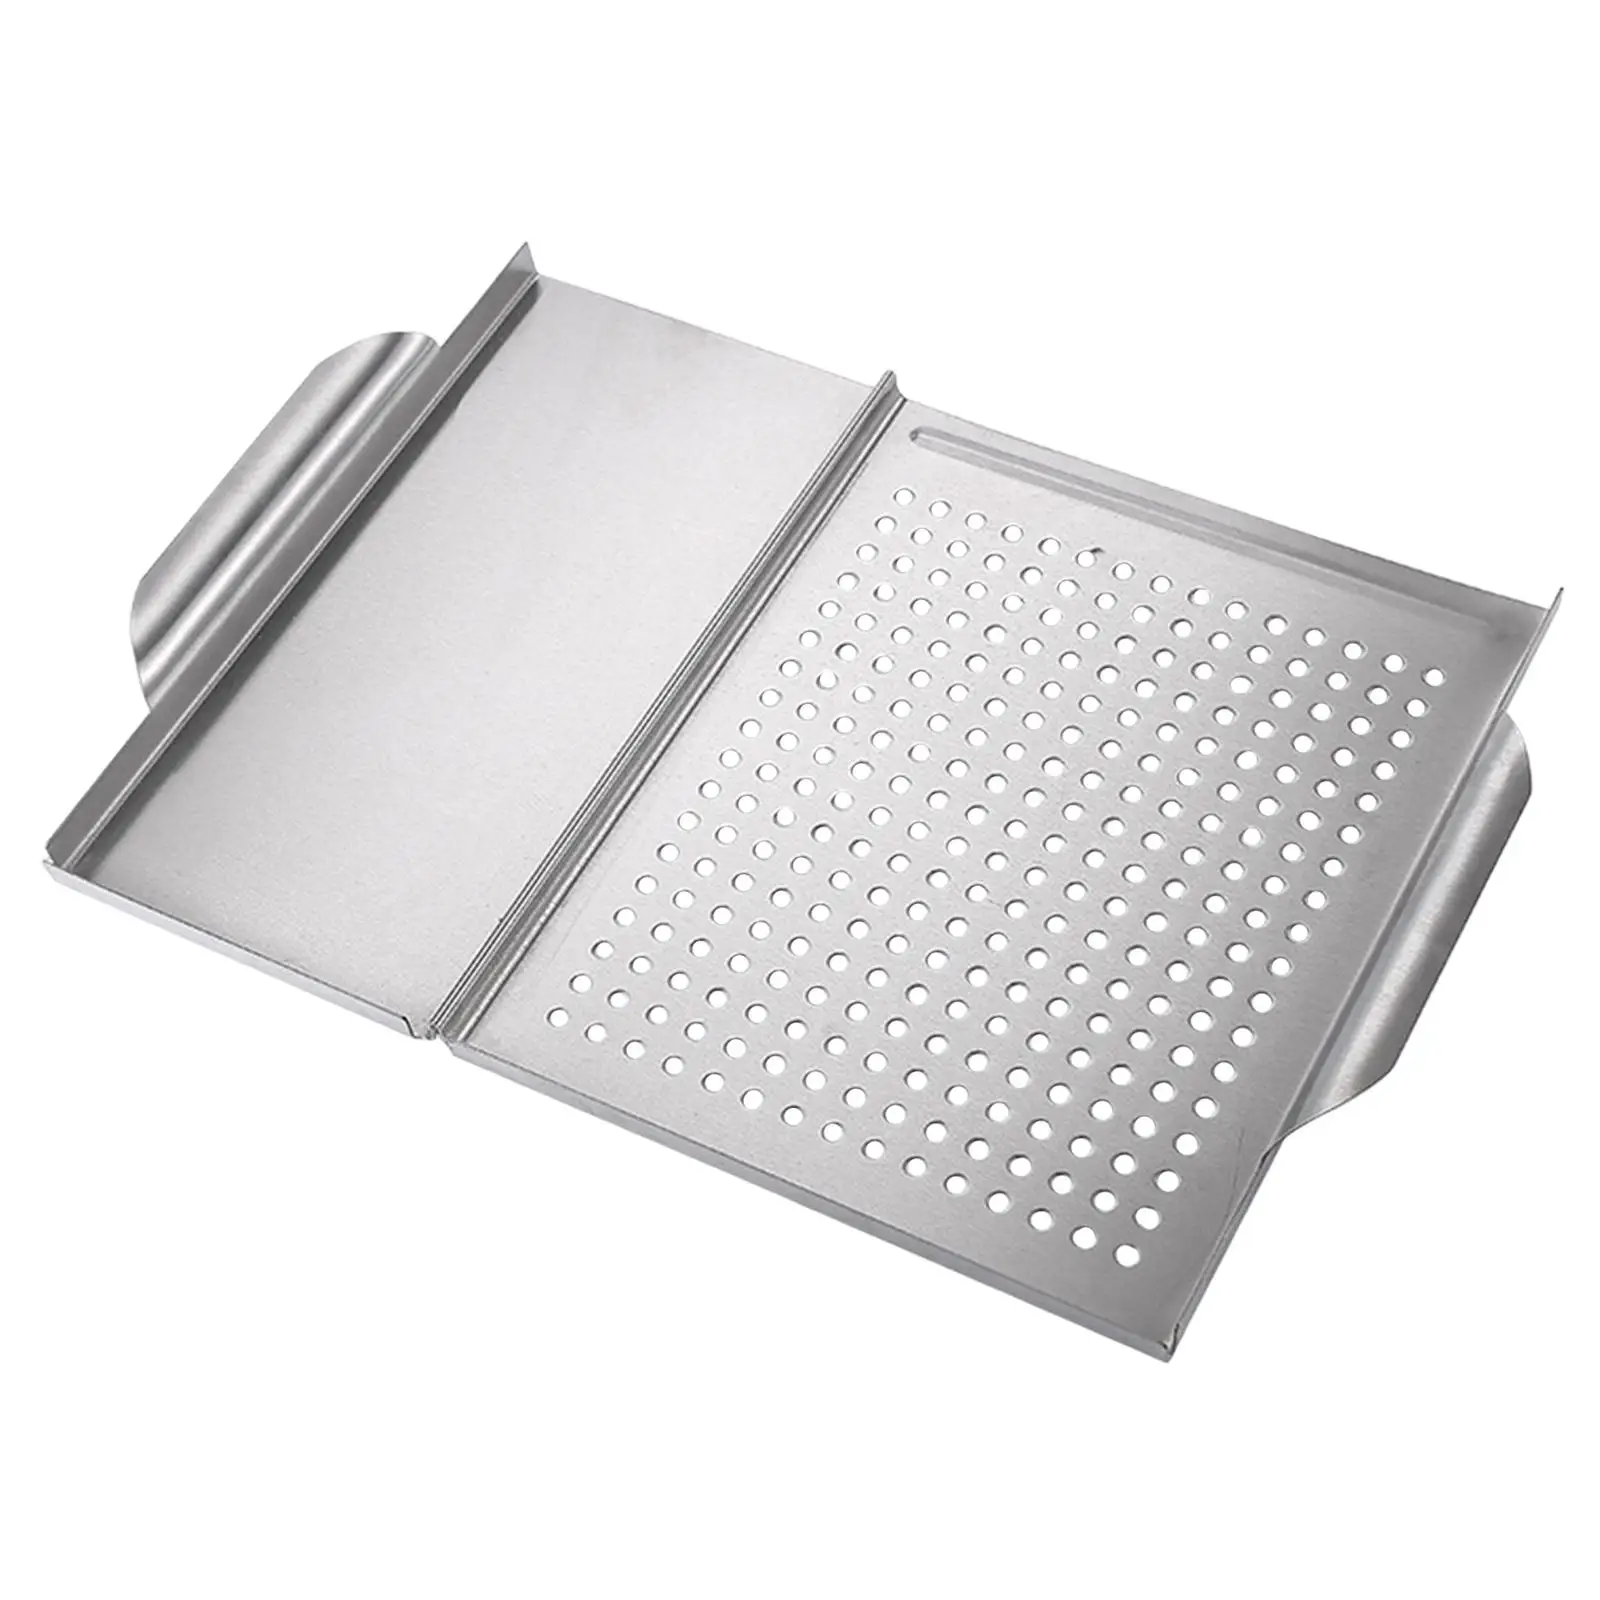 Grilling Tray Nonstick Grill Basket with Holes for Chef Baking Outdoor